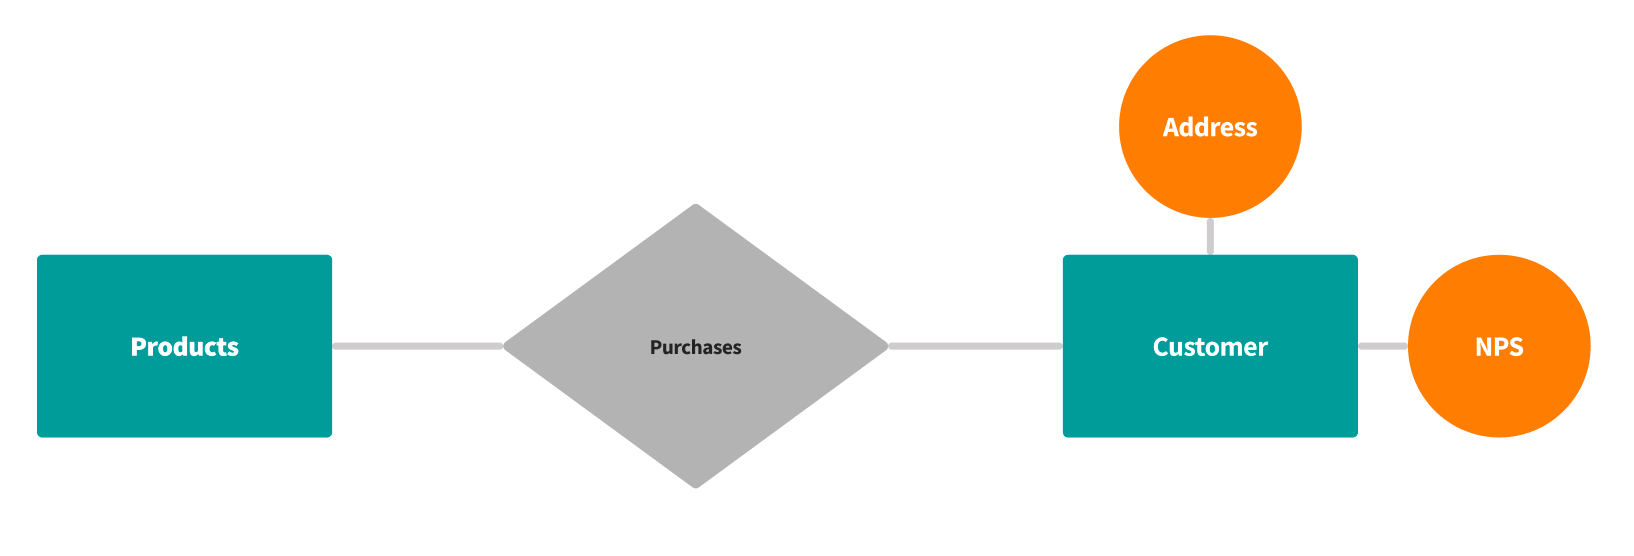 An image of a simplified ER model between customers and products